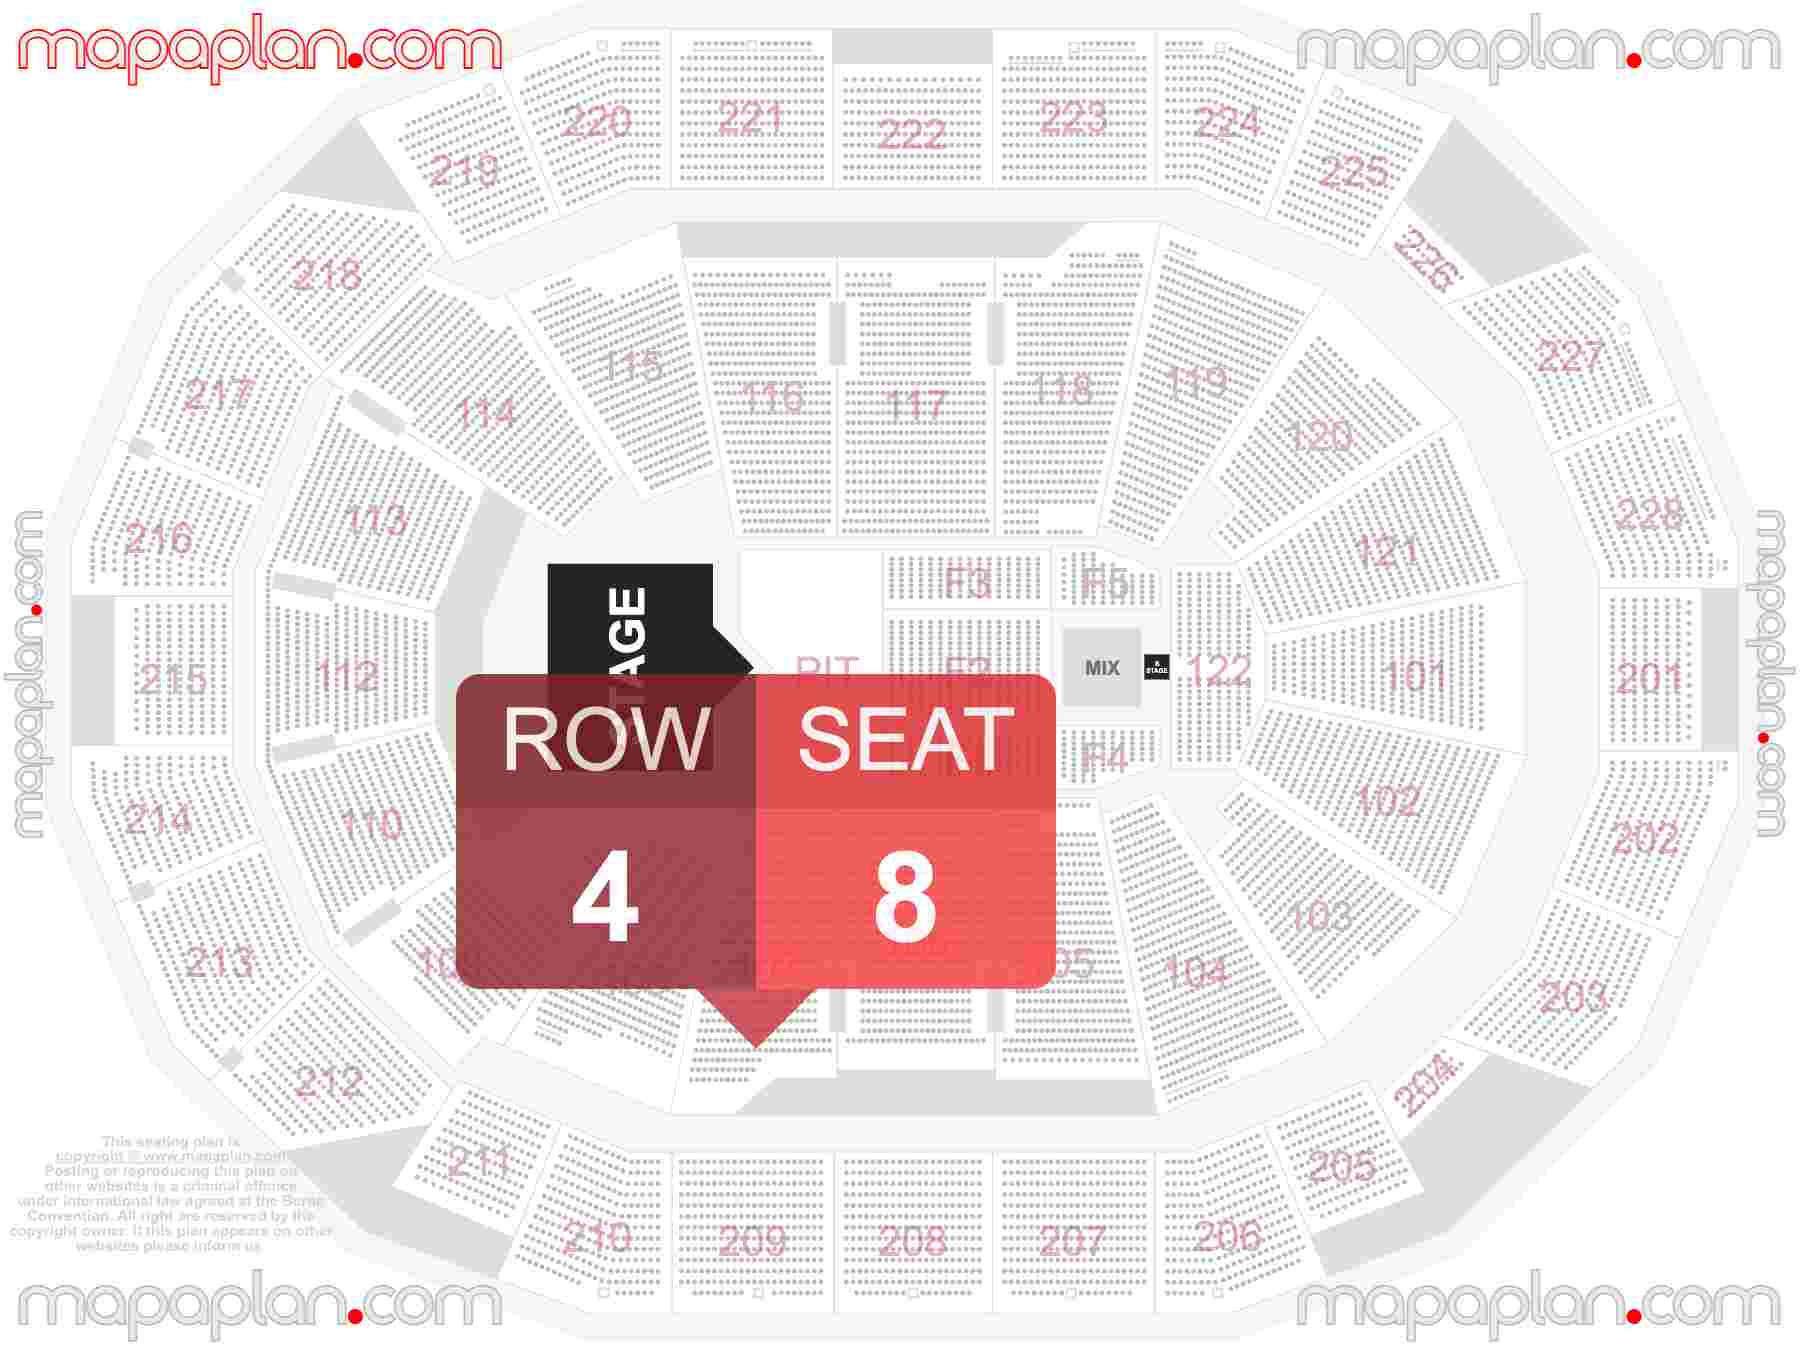 Milwaukee Fiserv Forum seating chart Concert with PIT floor standing detailed seating chart - 3d virtual seat numbers and row layout